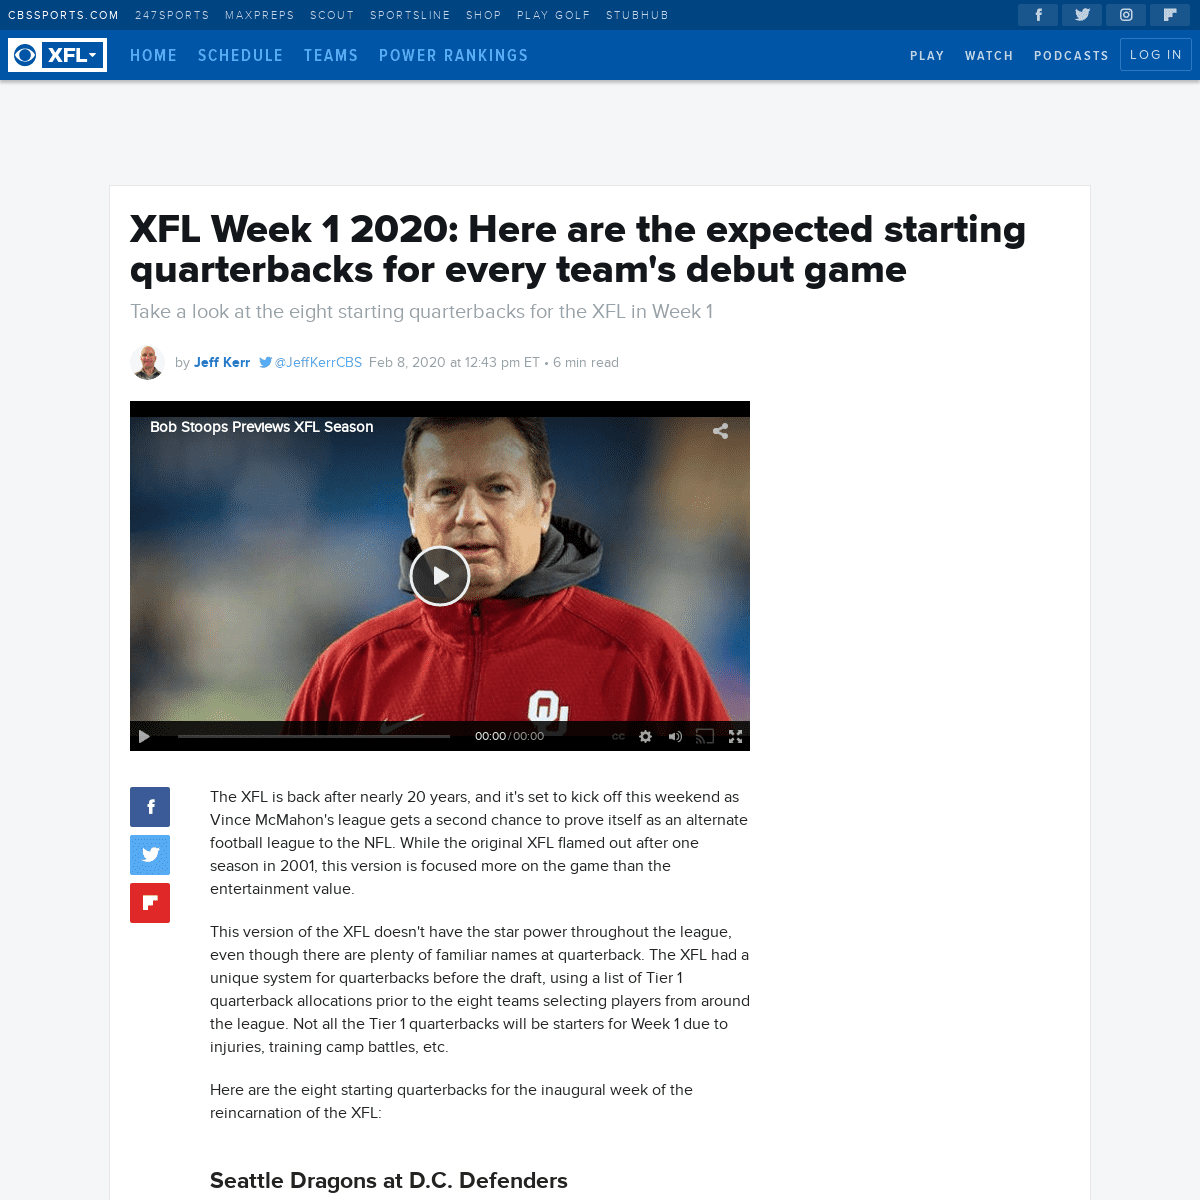 A complete backup of www.cbssports.com/xfl/news/xfl-week-1-2020-here-are-the-expected-starting-quarterbacks-for-every-teams-debu